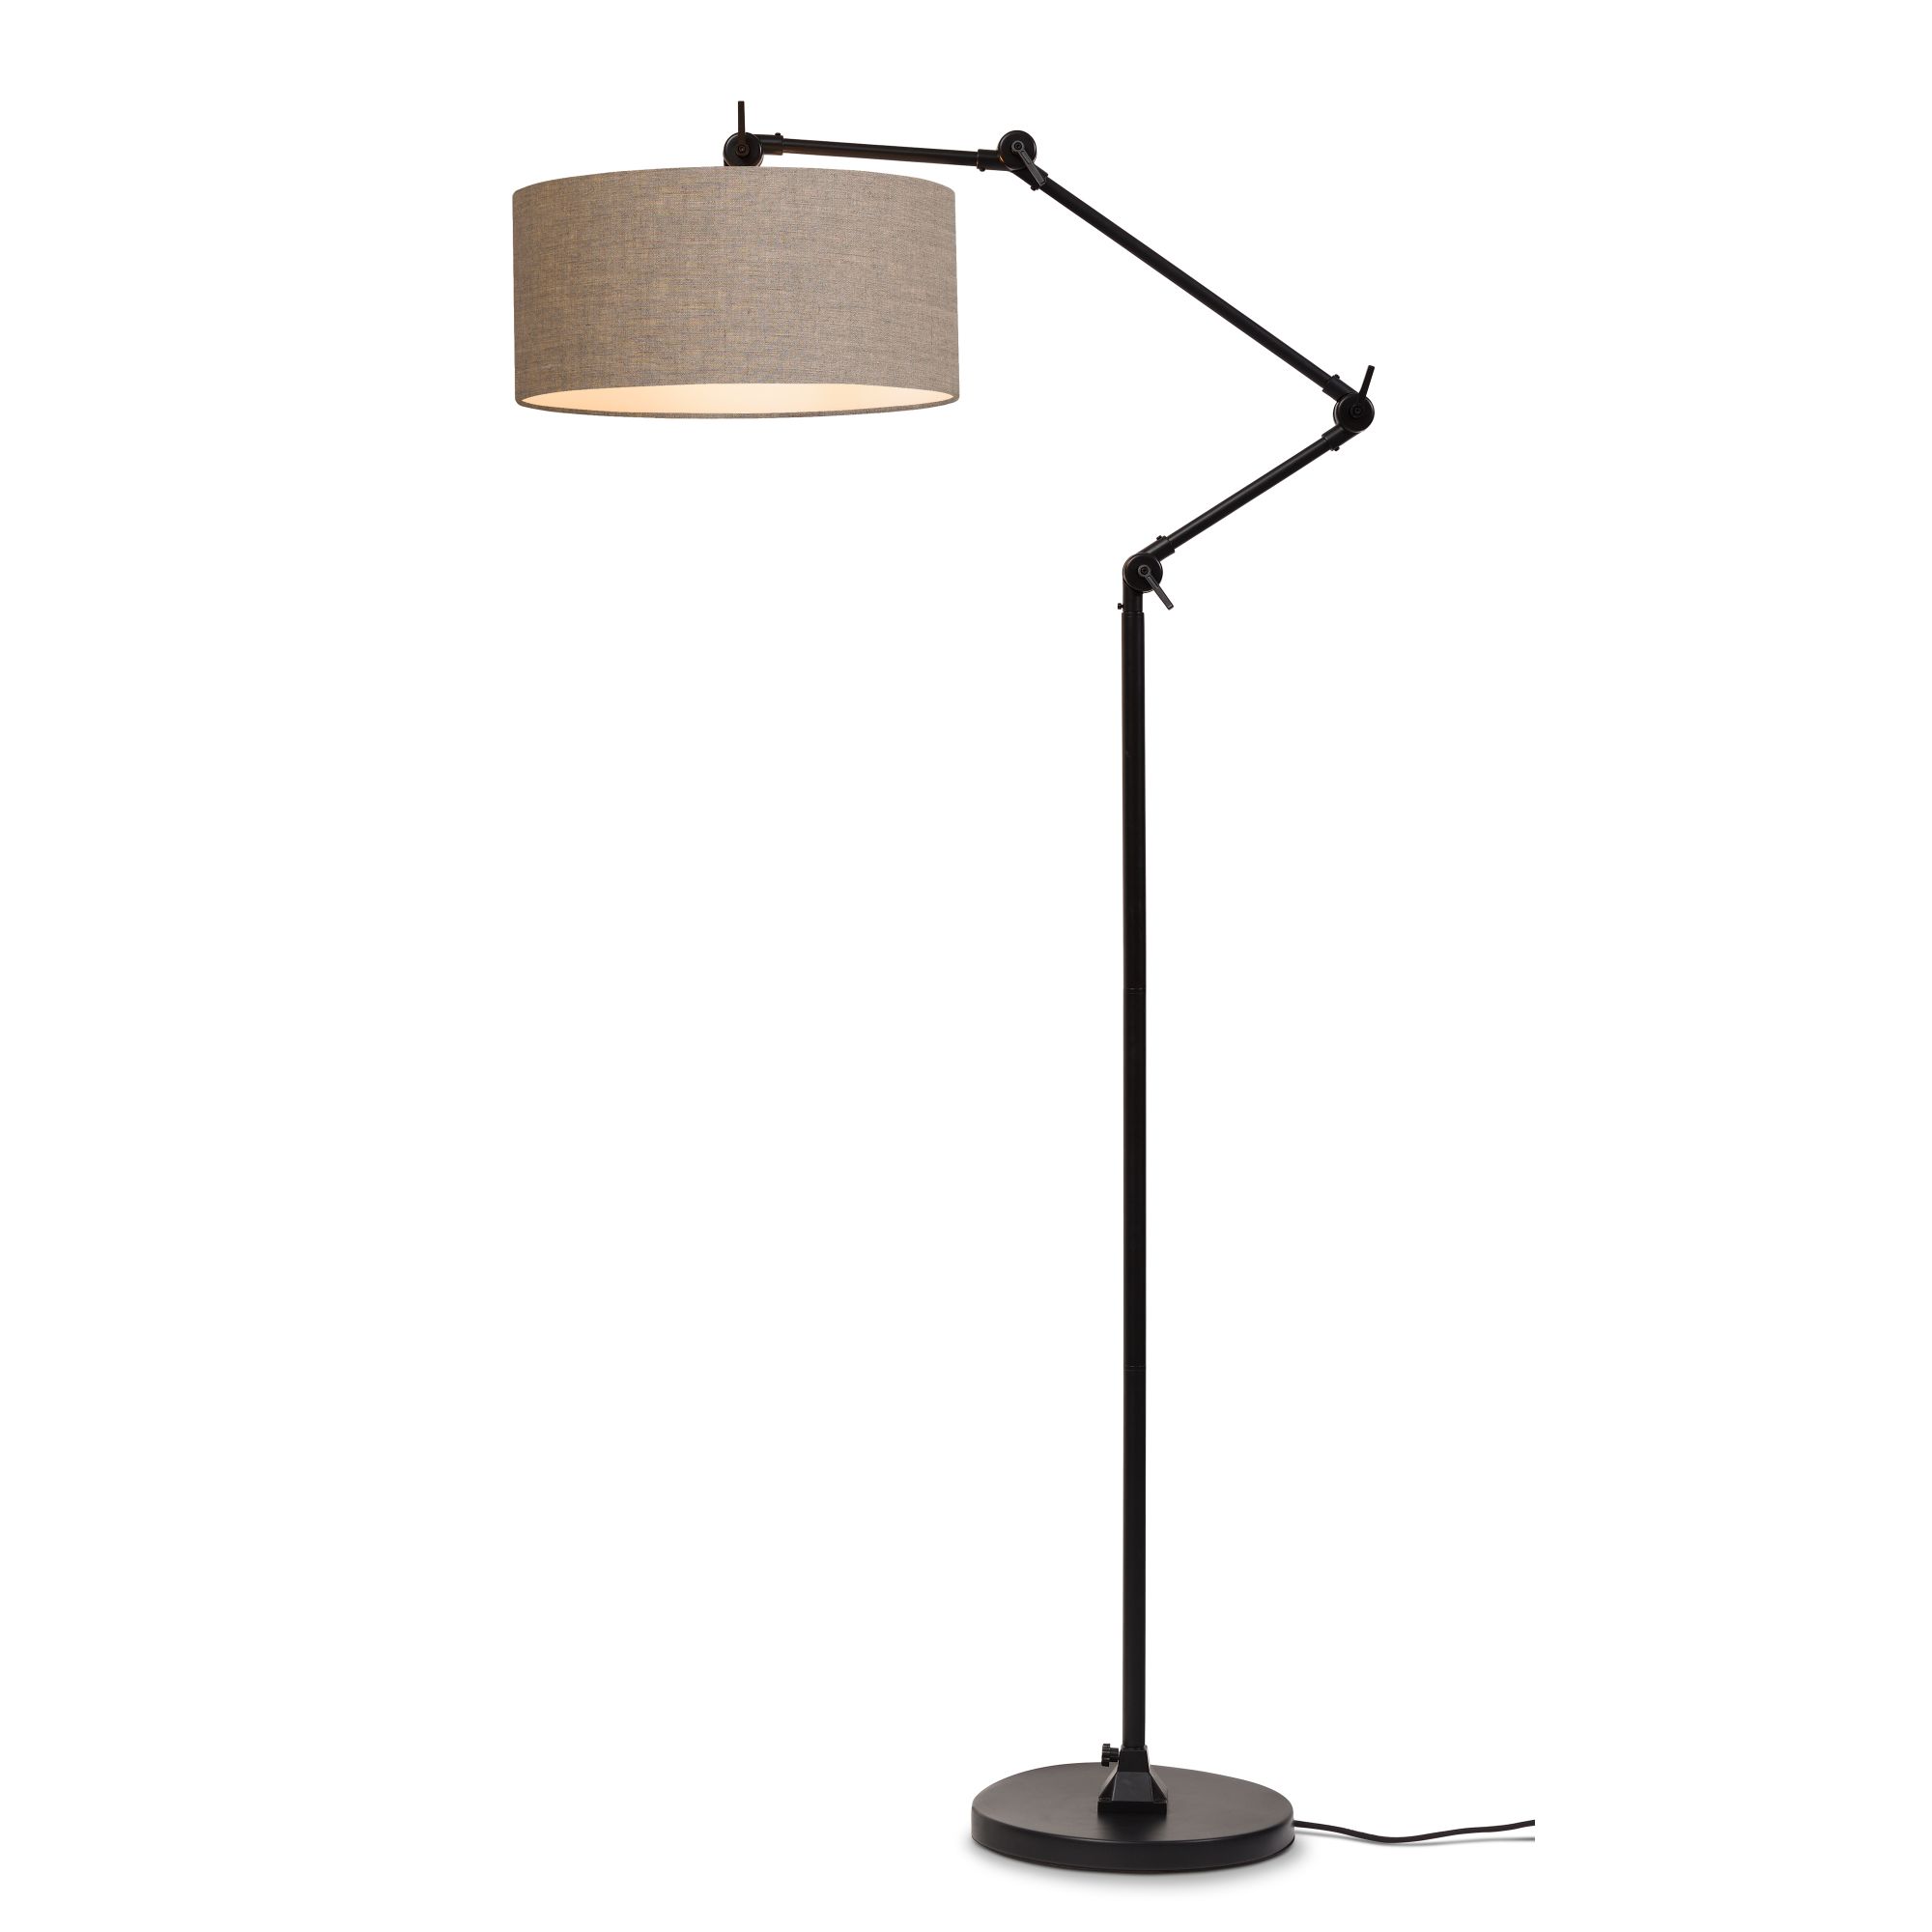 its about RoMi Vloerlamp Amsterdam 190cm - Donkerbeige